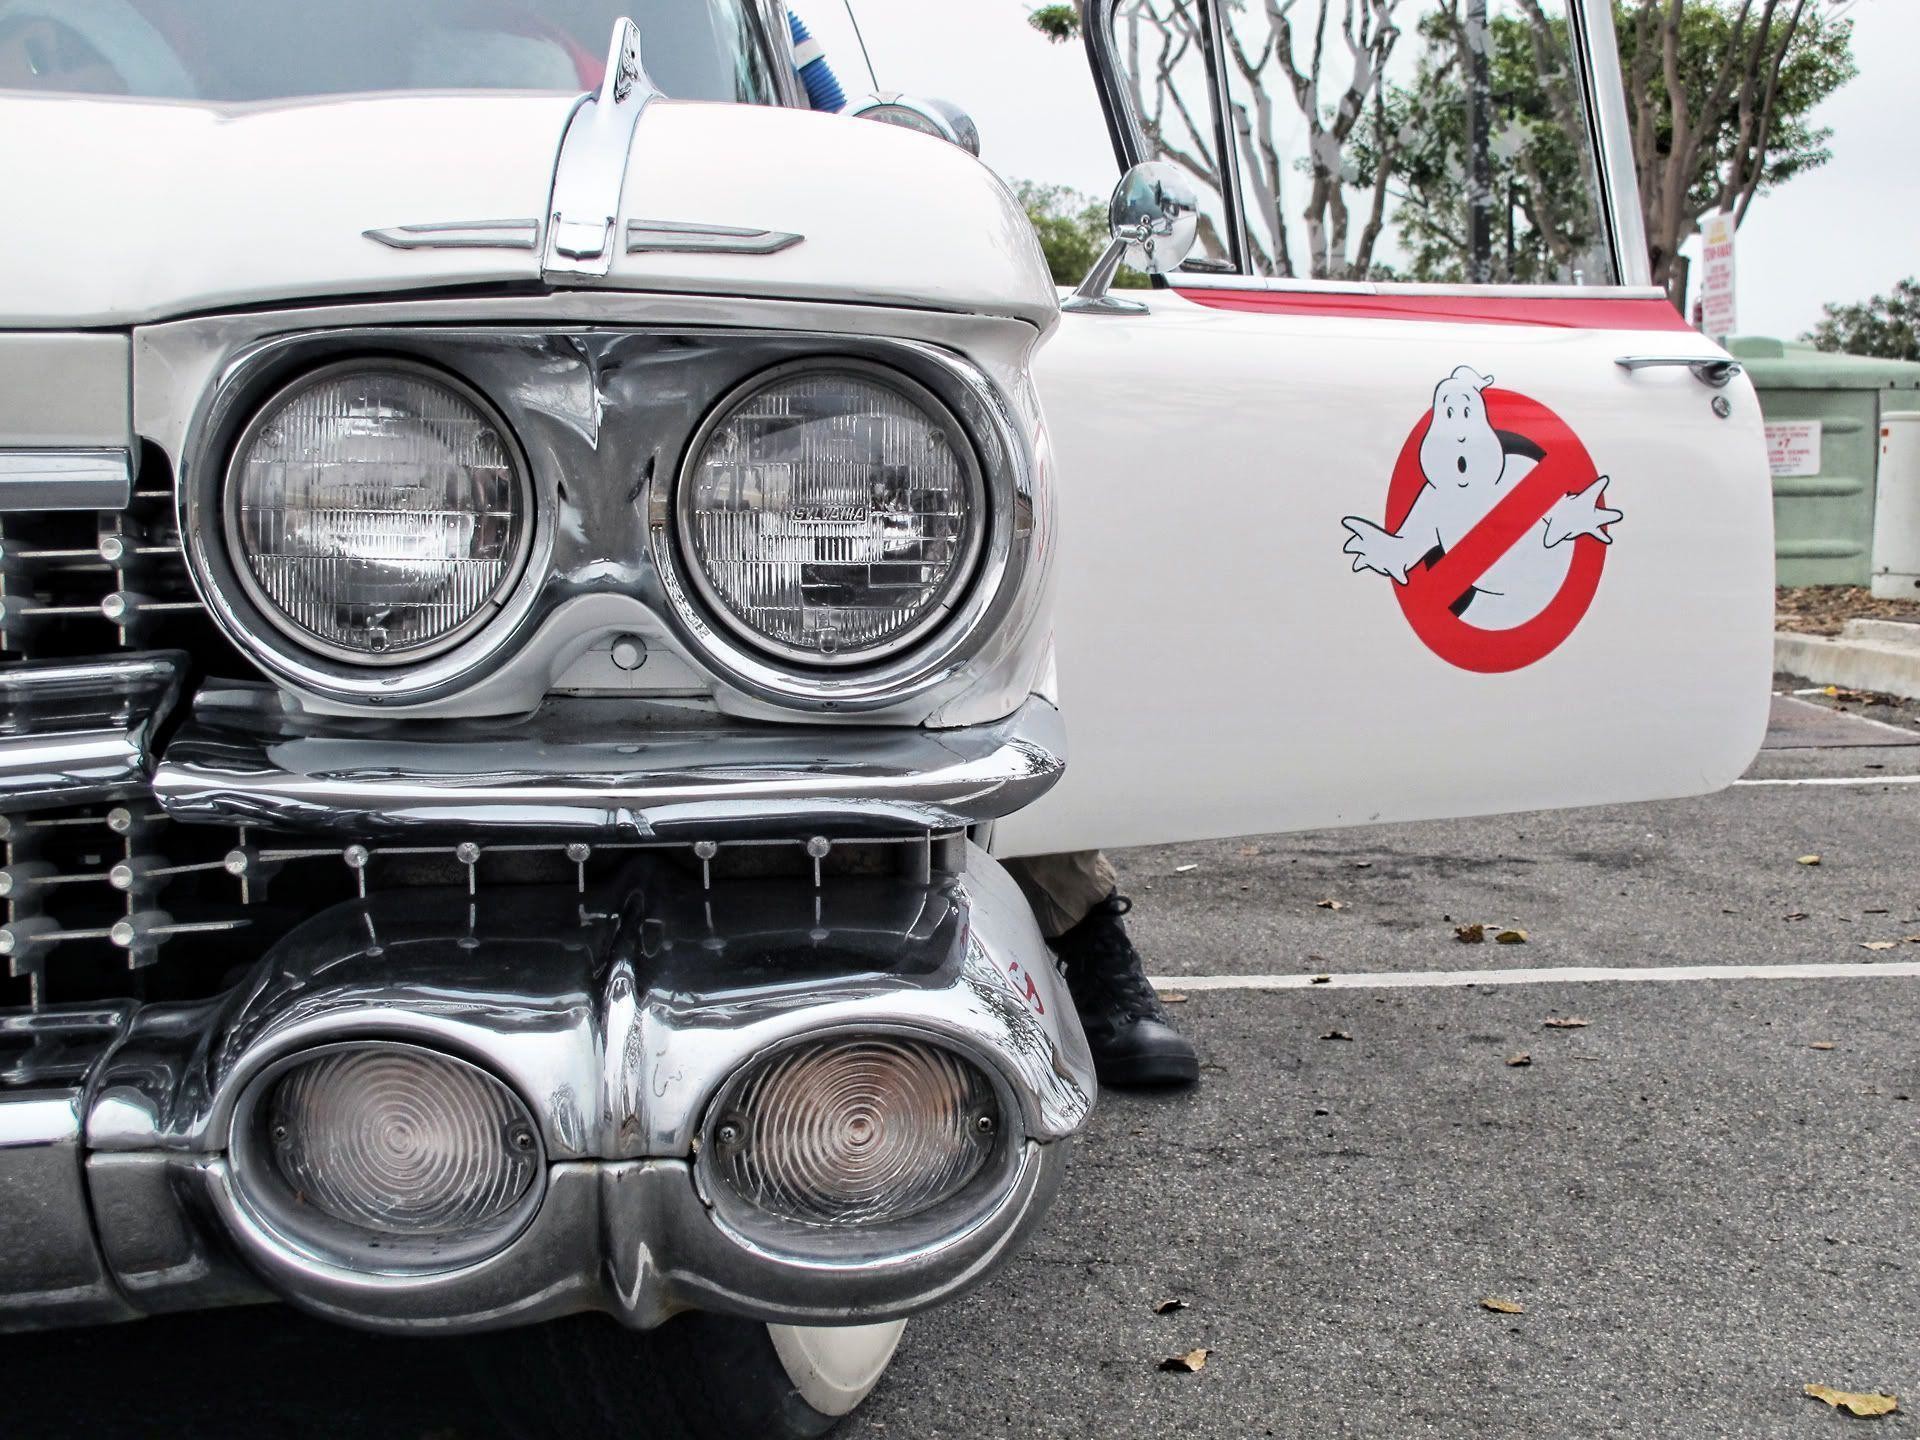 1920x1440 High-Resolution Ecto-1 Wallpapers - Ghostbusters Fans